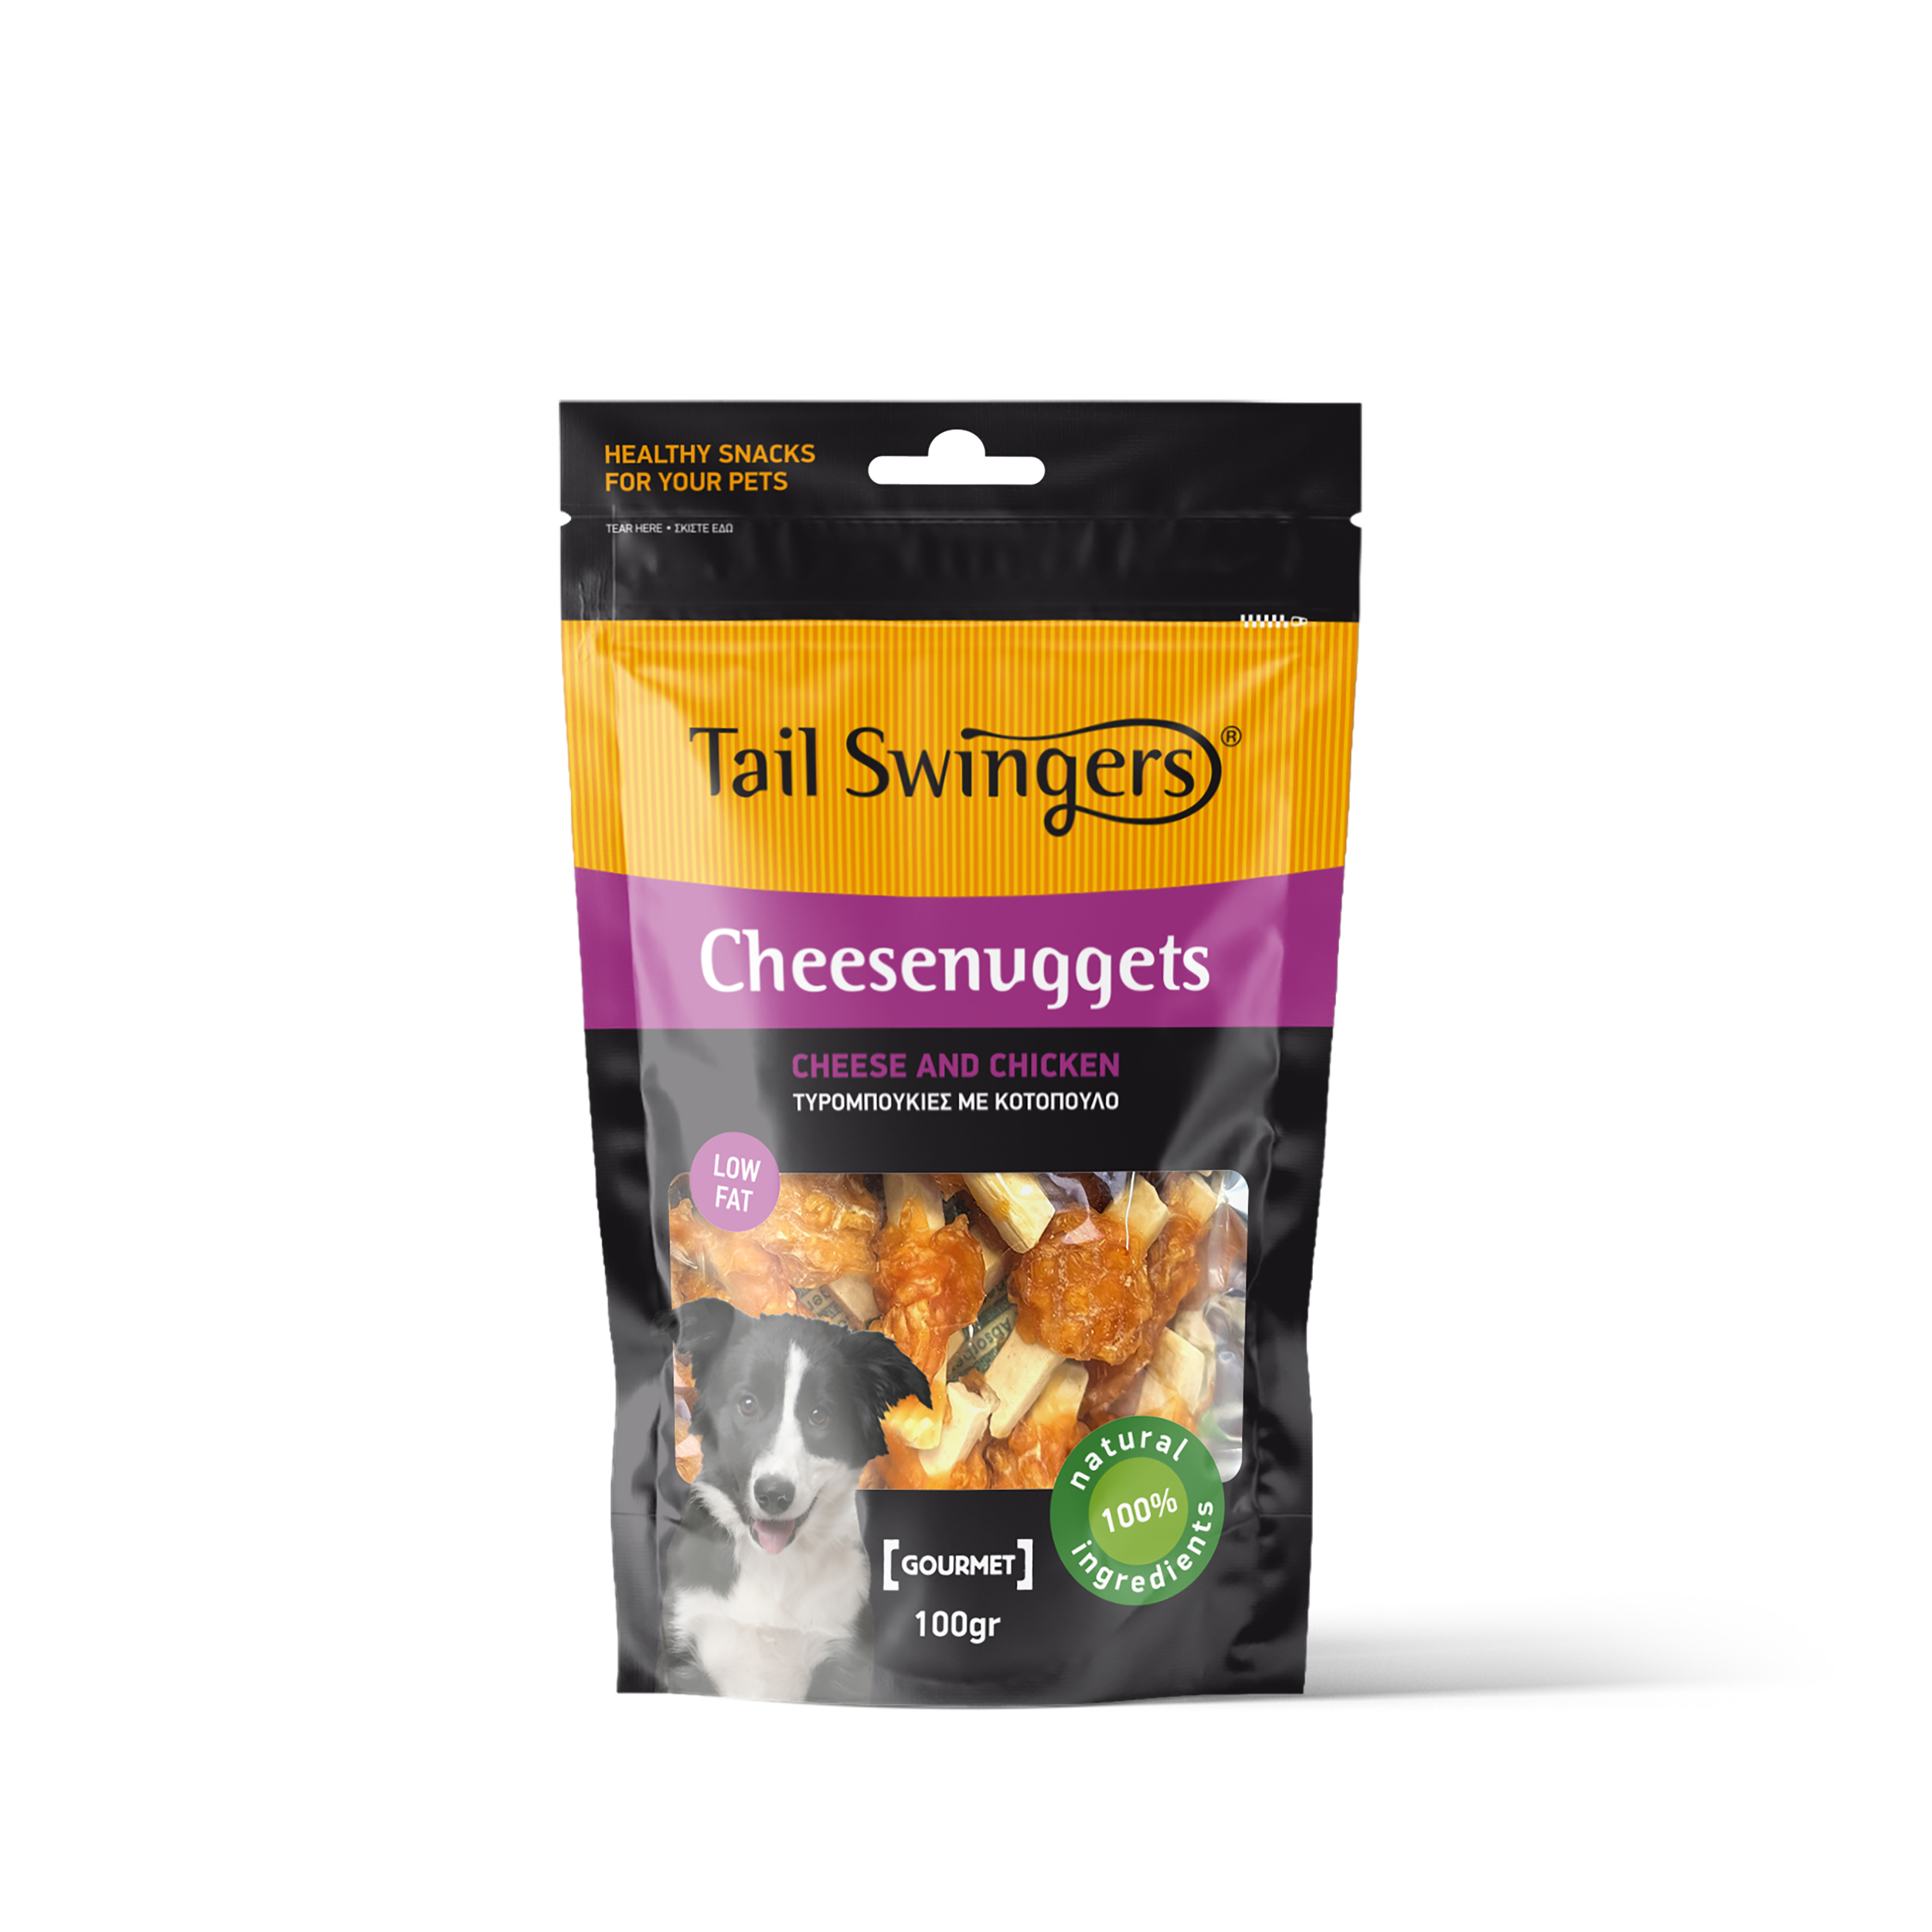 Tail Swingers Cheesenuggets